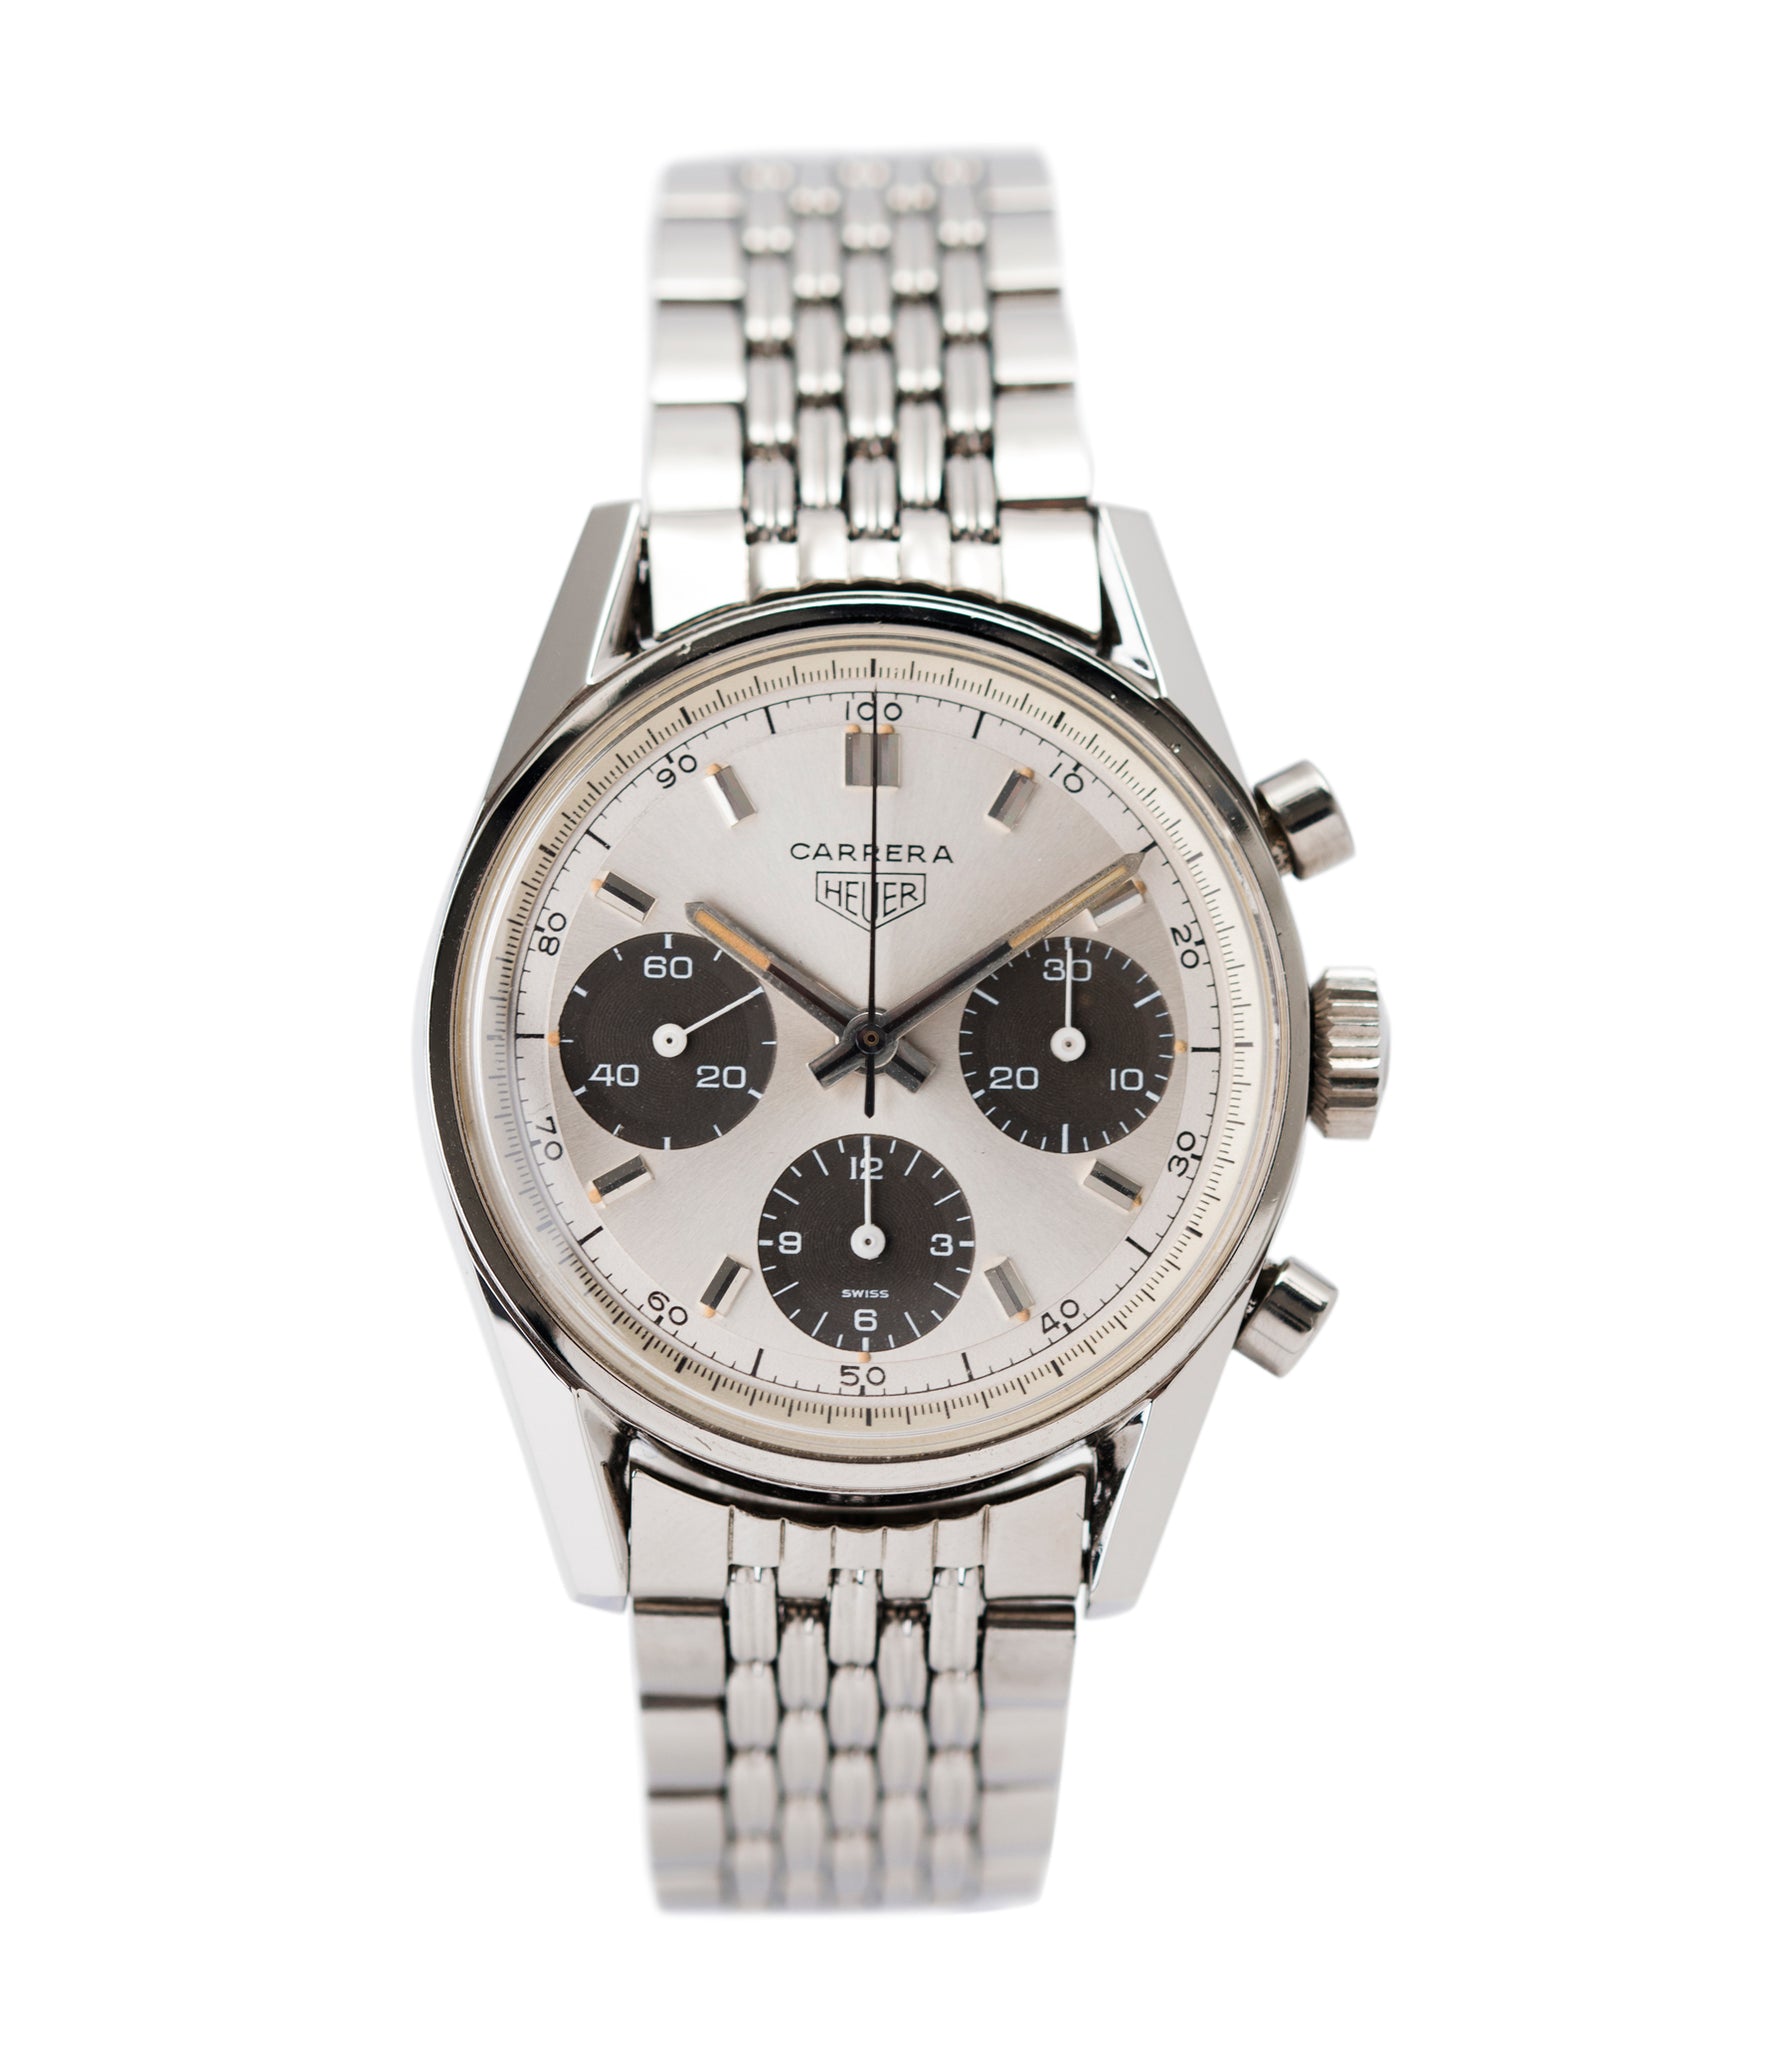 buy vintage Heuer Carrera 2447SND panda dial steel sport watch online at A Collected Man London UK specialist of rare vintage watches